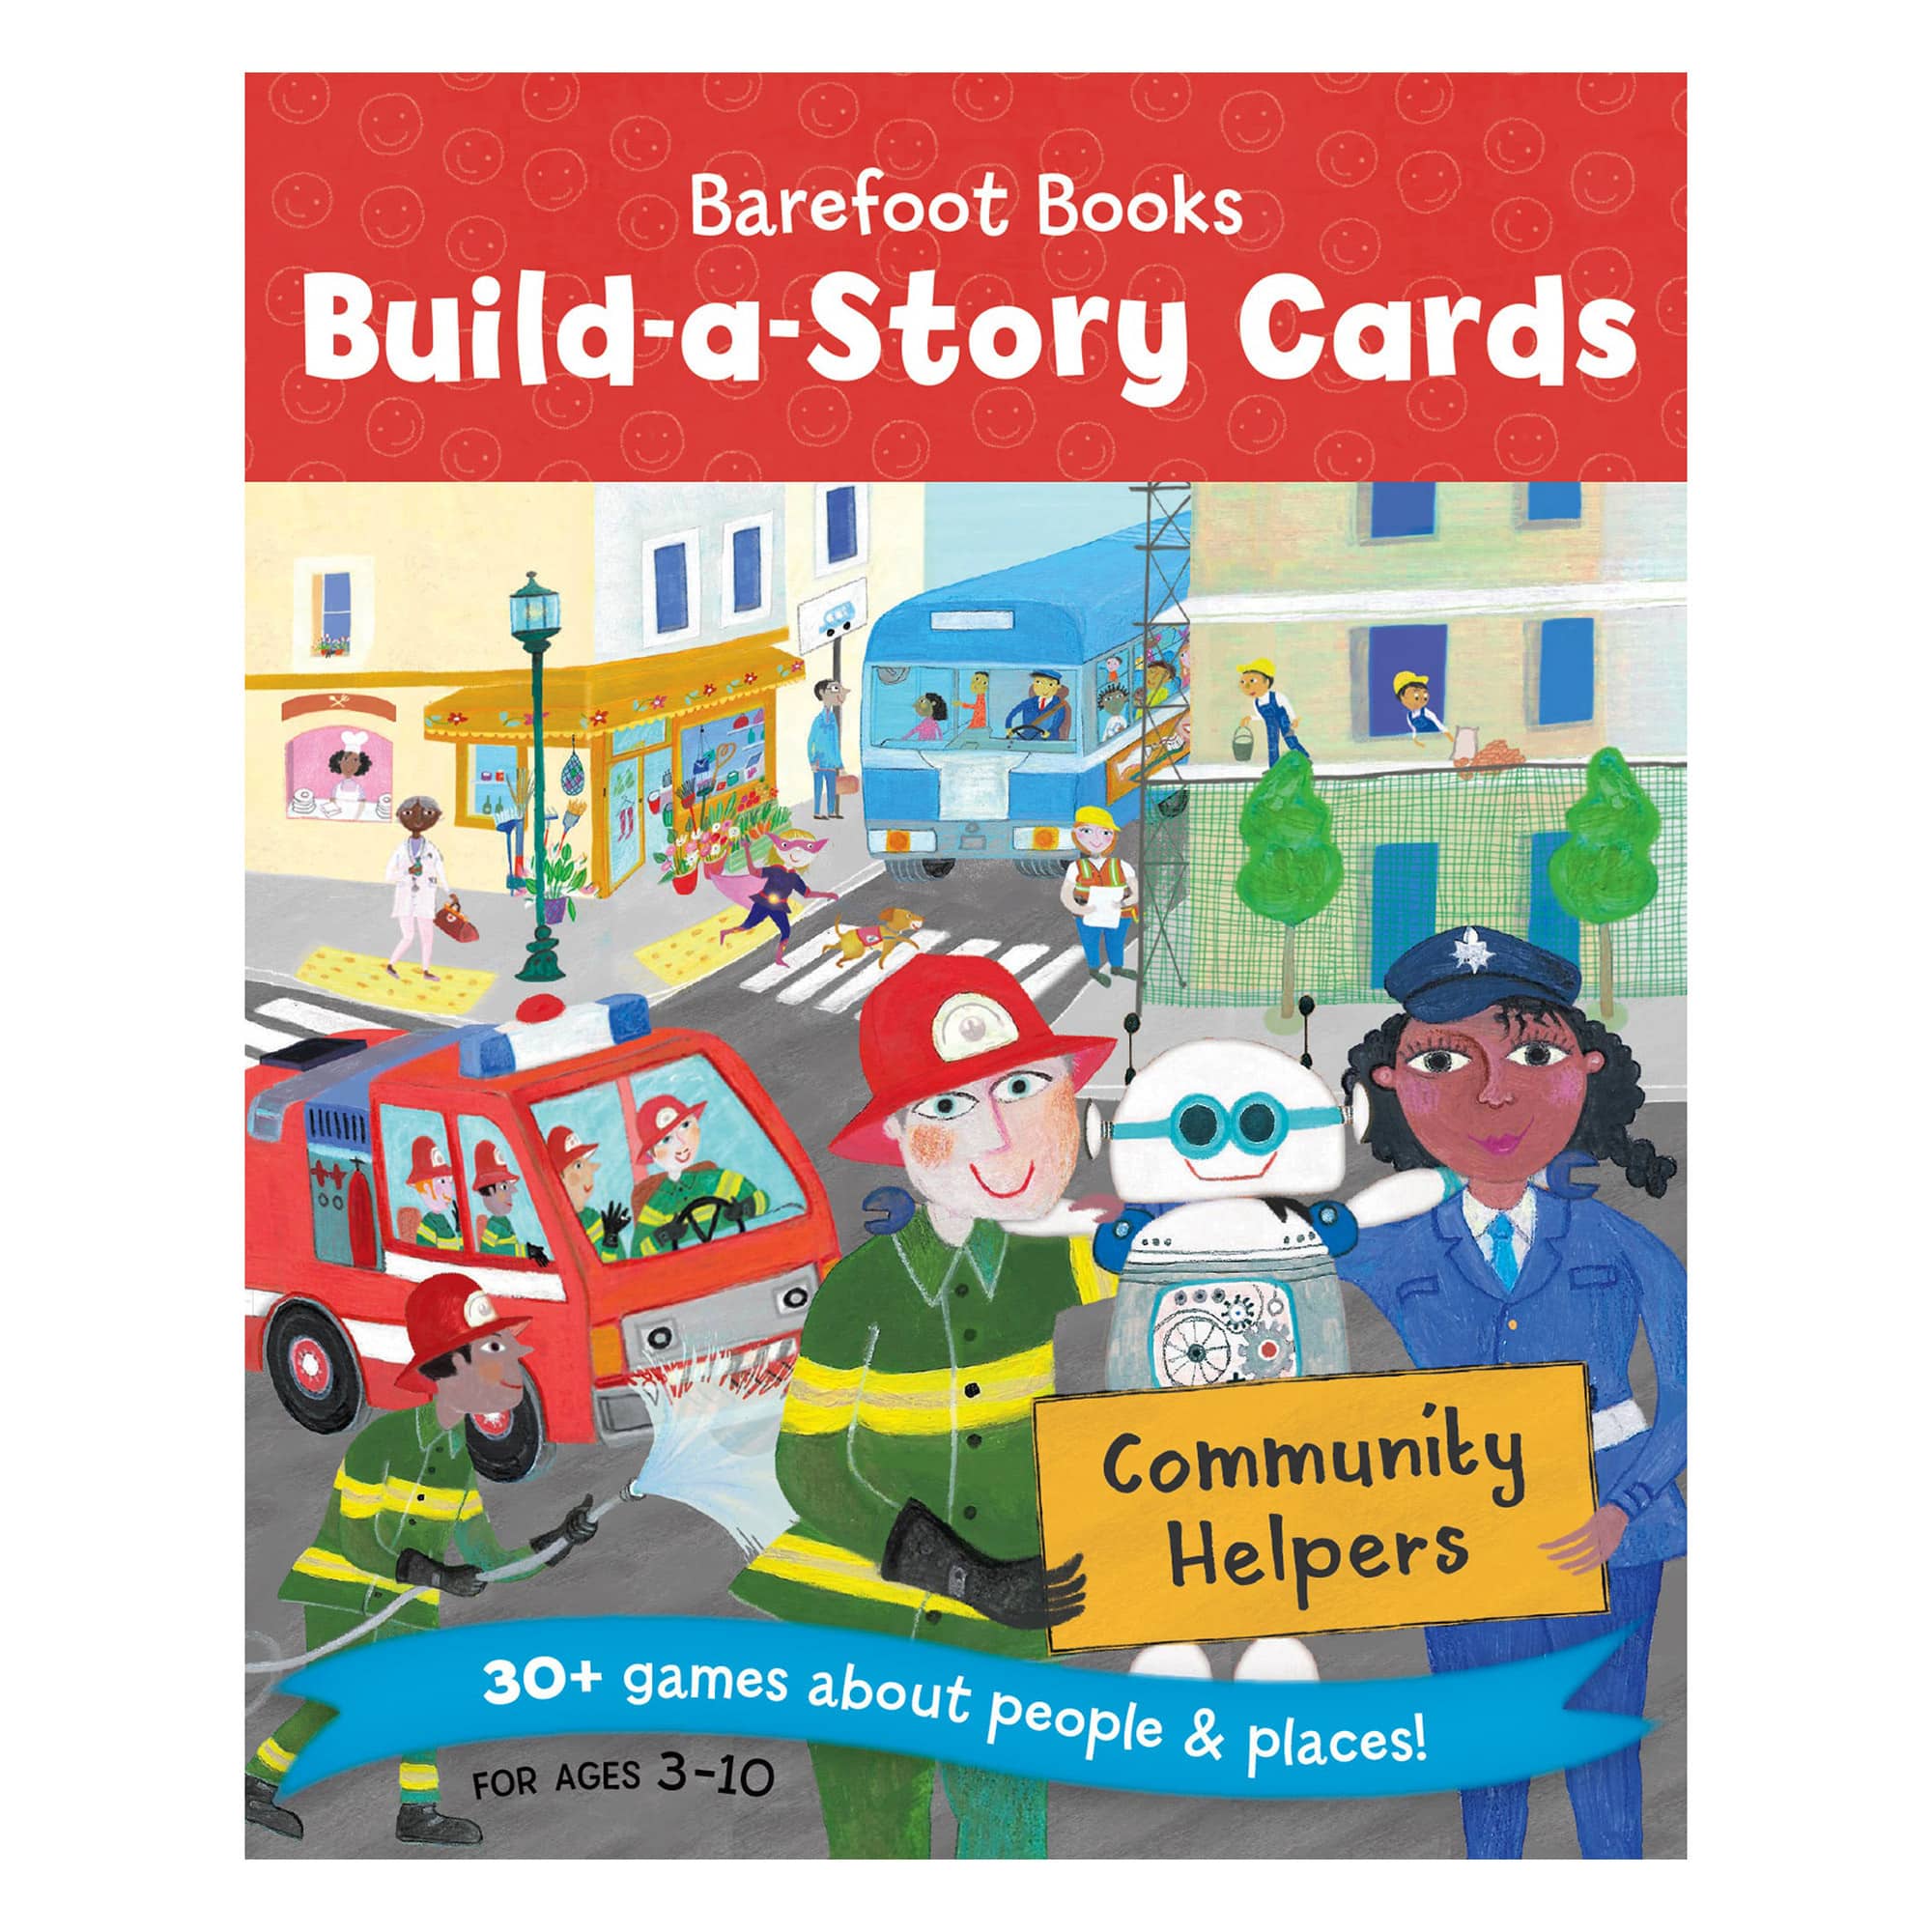 Build-a-Story Cards - Community Helpers - by Barefoot Books